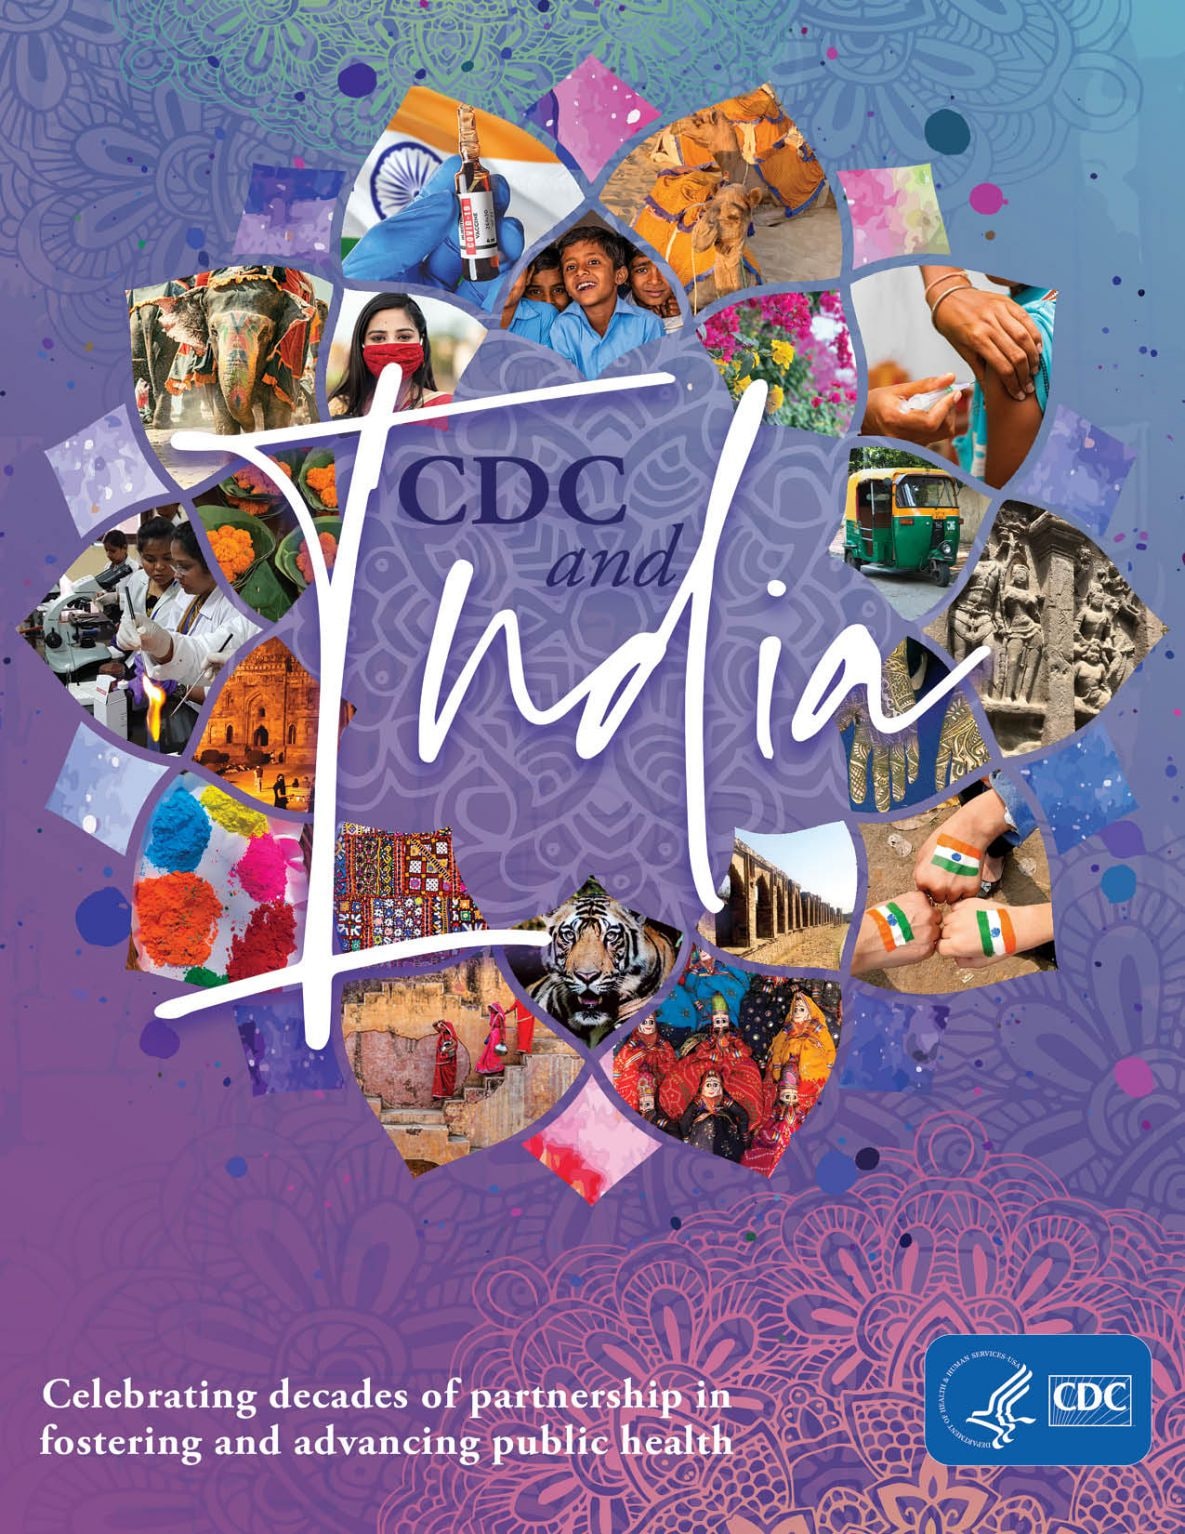 India Cover artwork - Celebrating decades of partnership in fostering and advancing public health